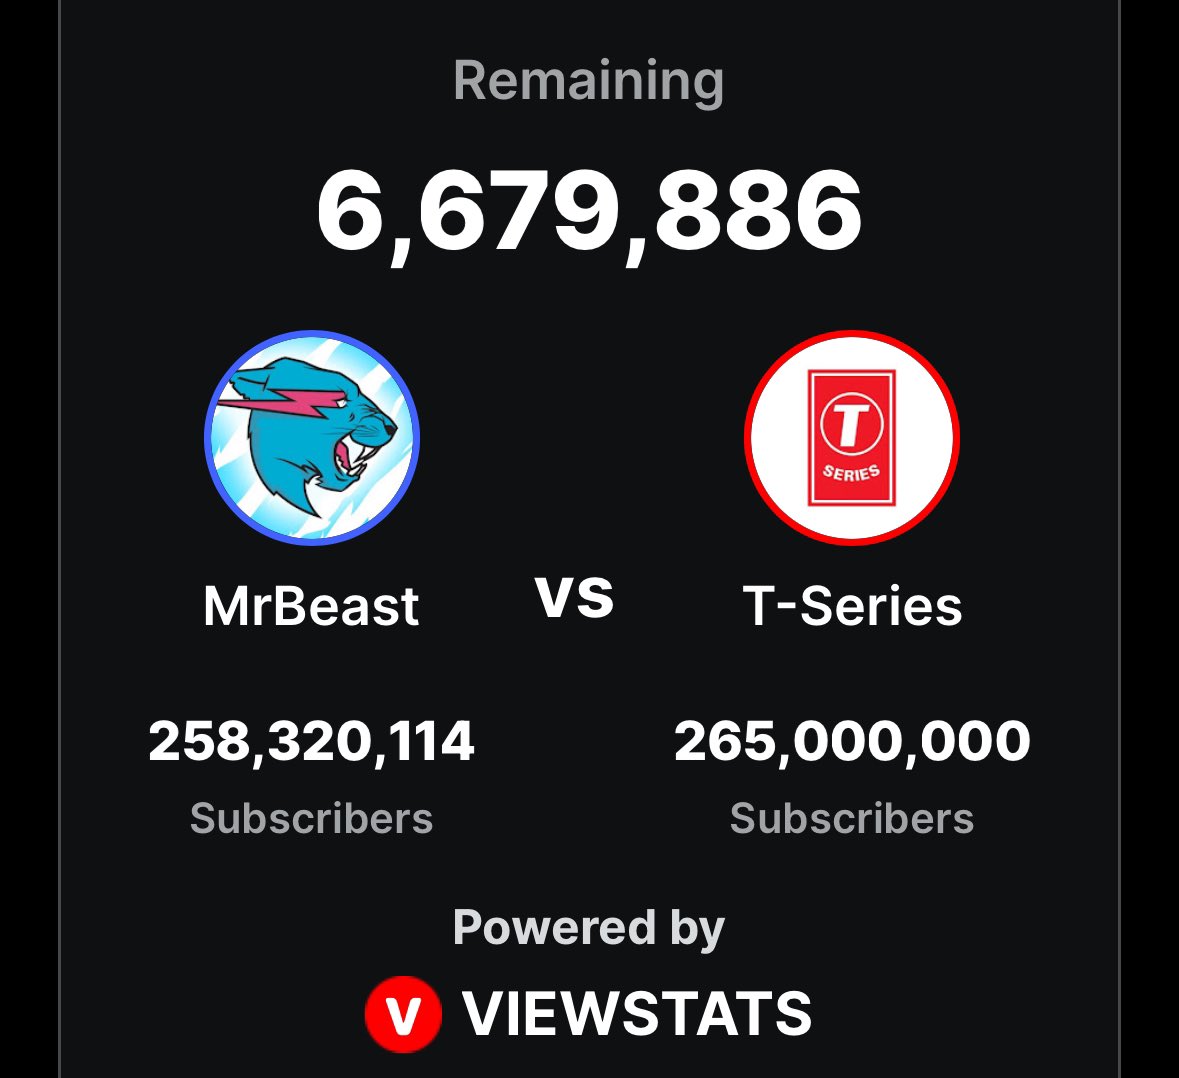 I challenge the CEO of T-Series to a boxing match